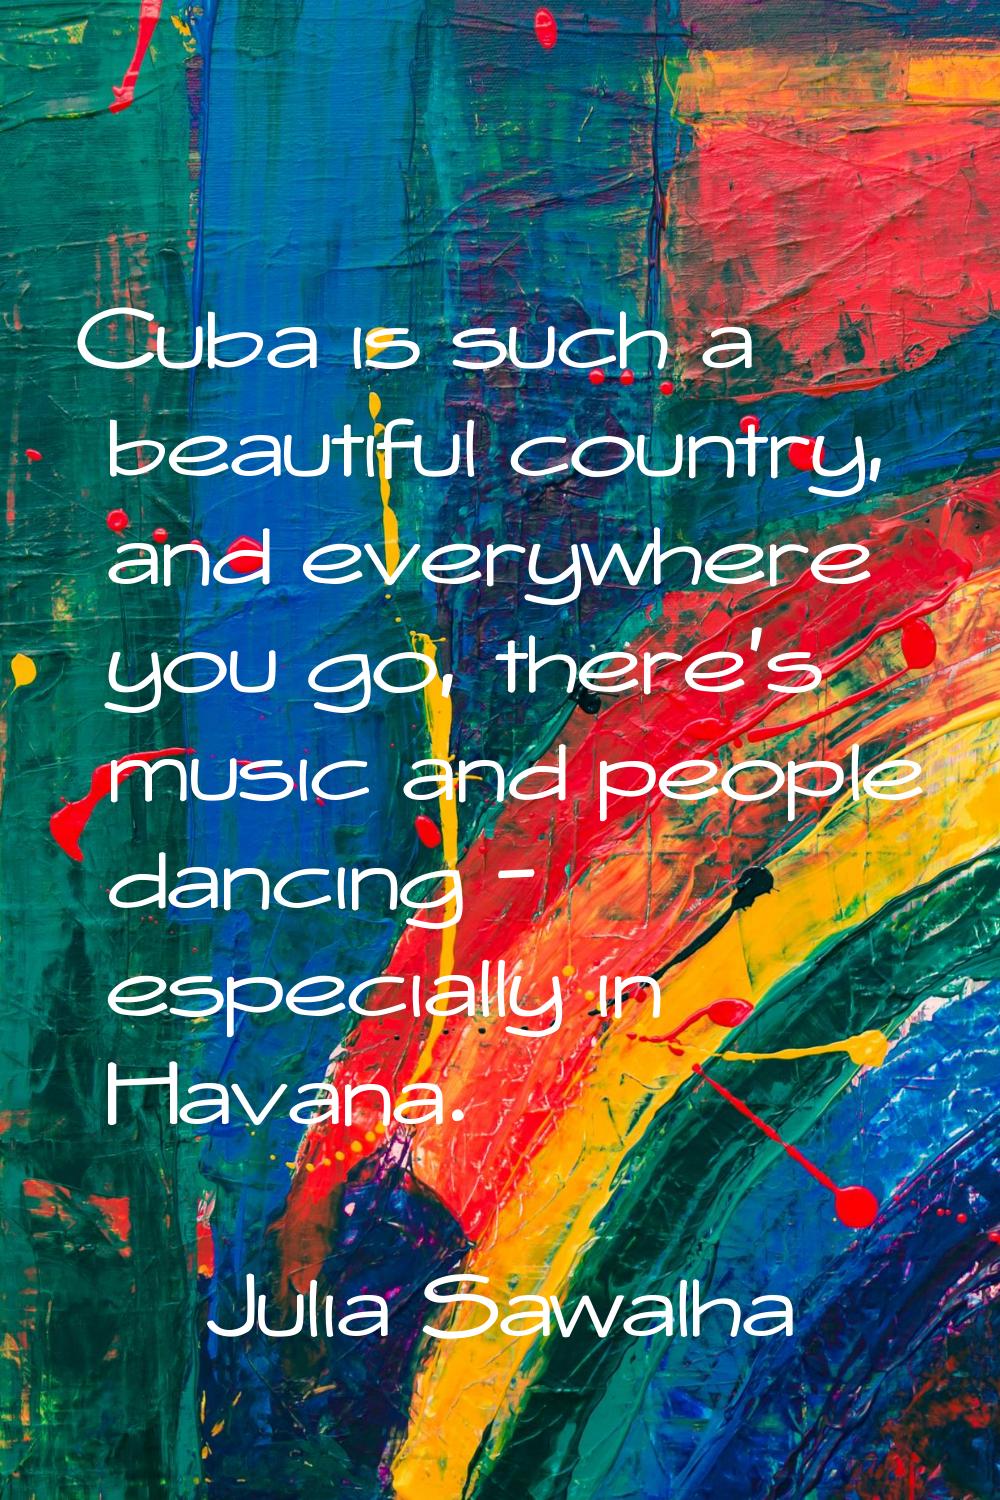 Cuba is such a beautiful country, and everywhere you go, there's music and people dancing - especia